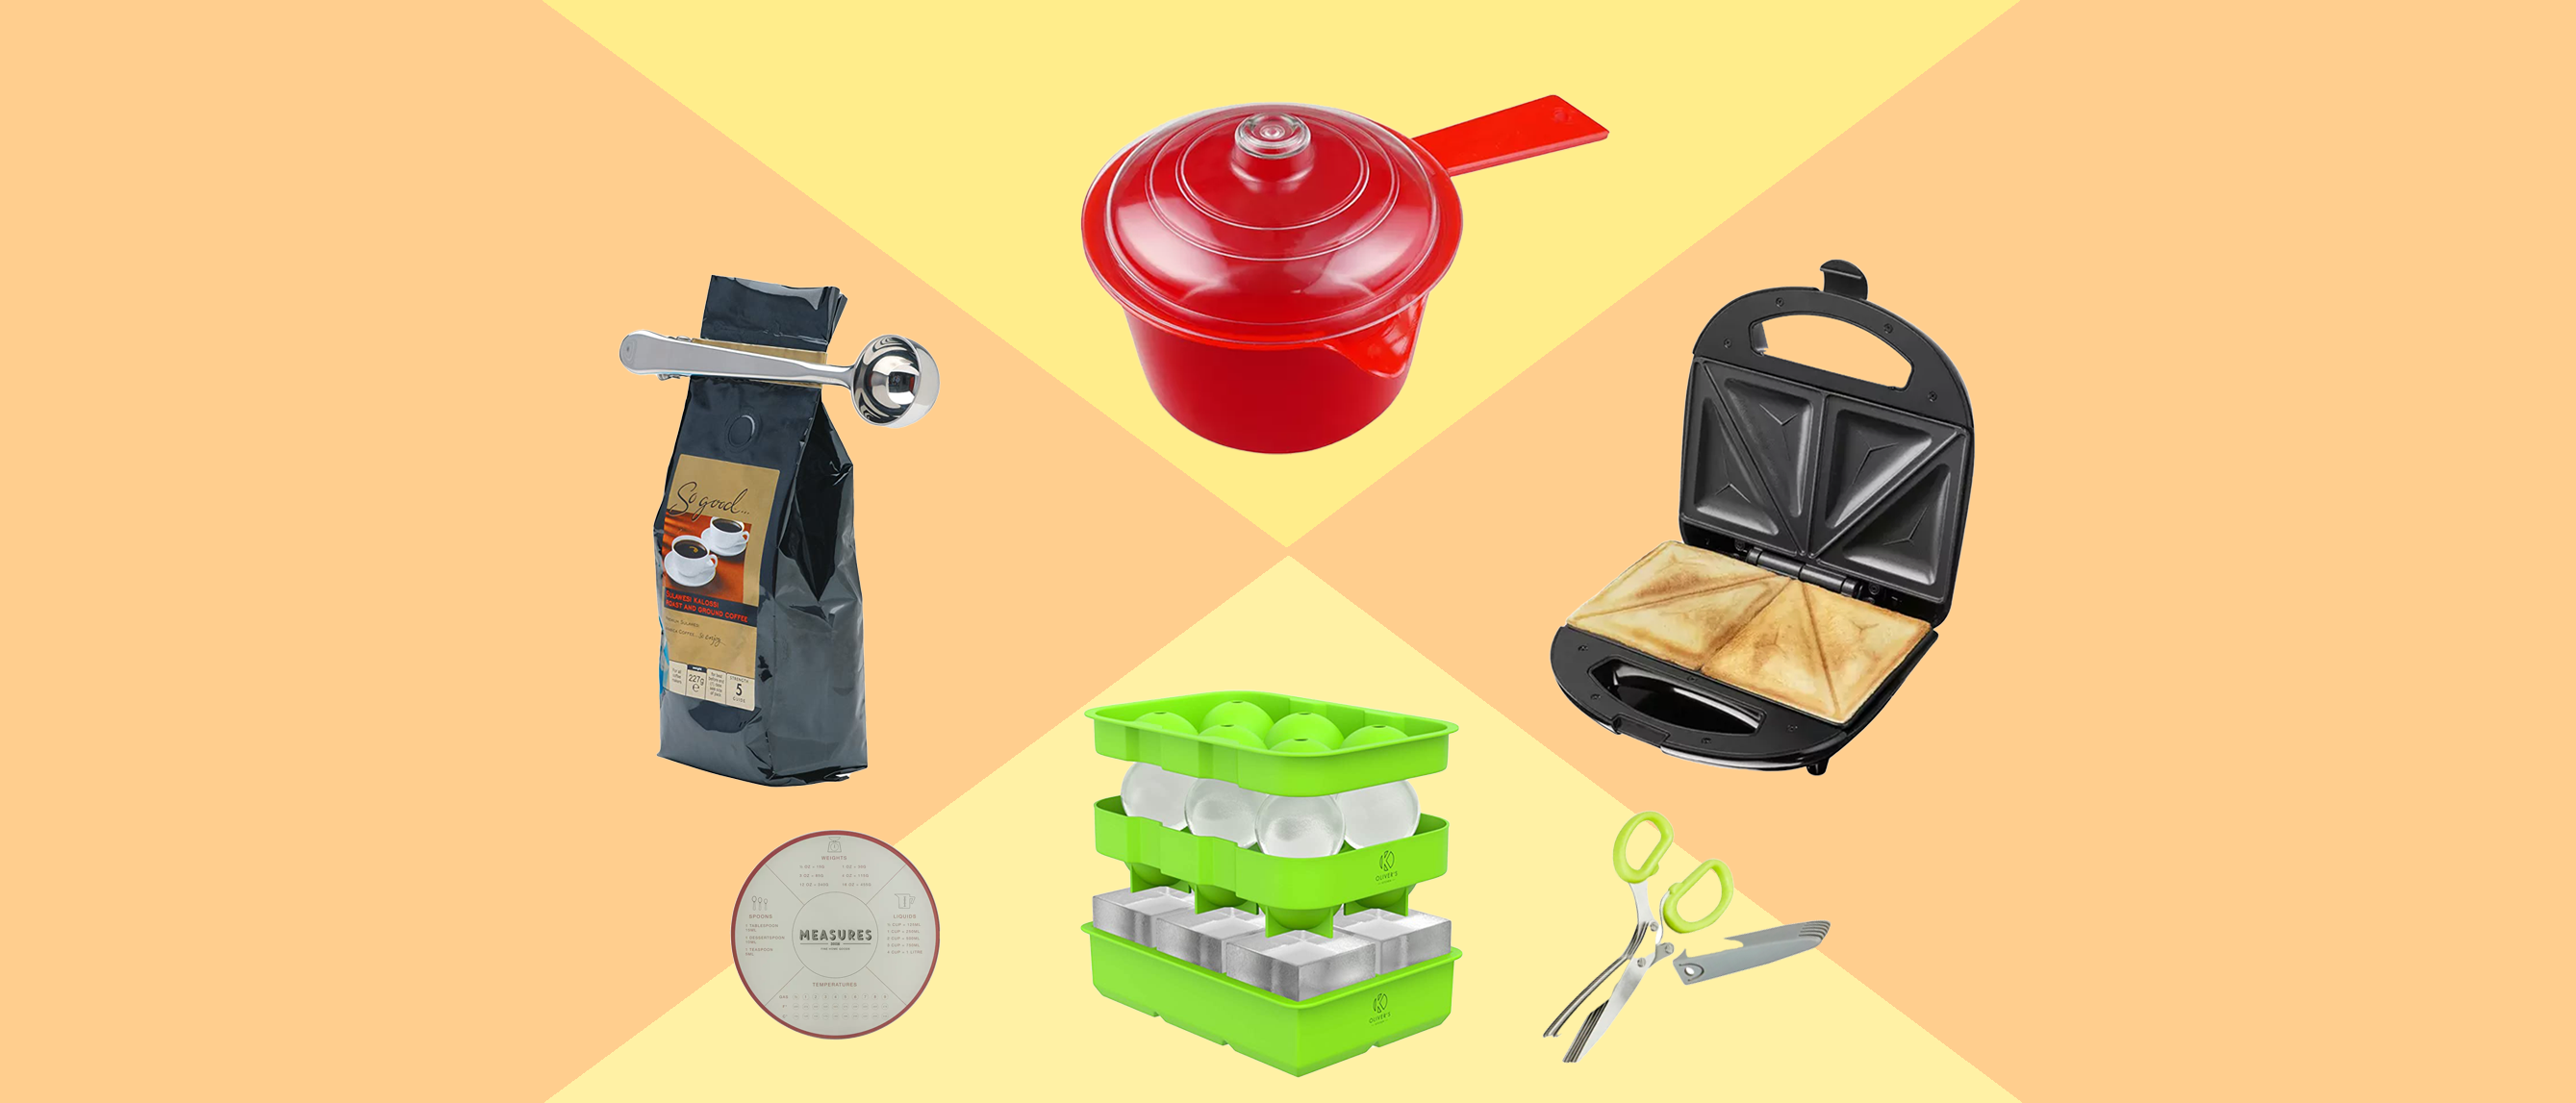 10 Affordable And Useful Kitchen Gadgets Every Home